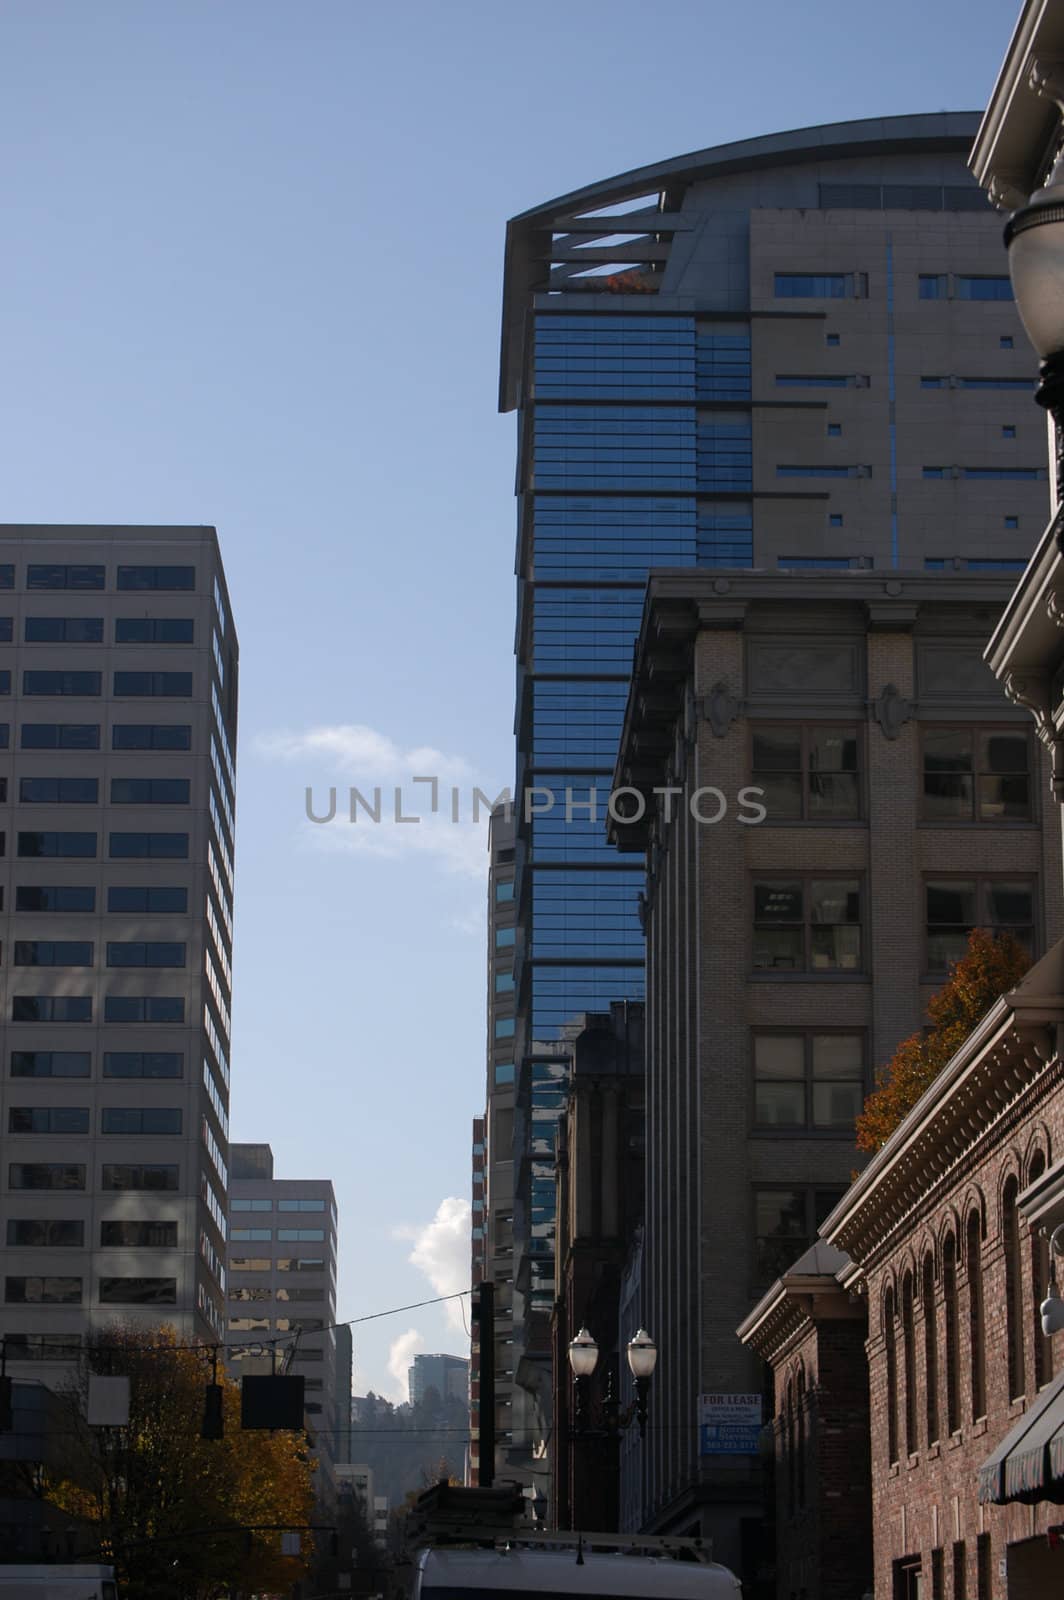 In the city by northwoodsphoto